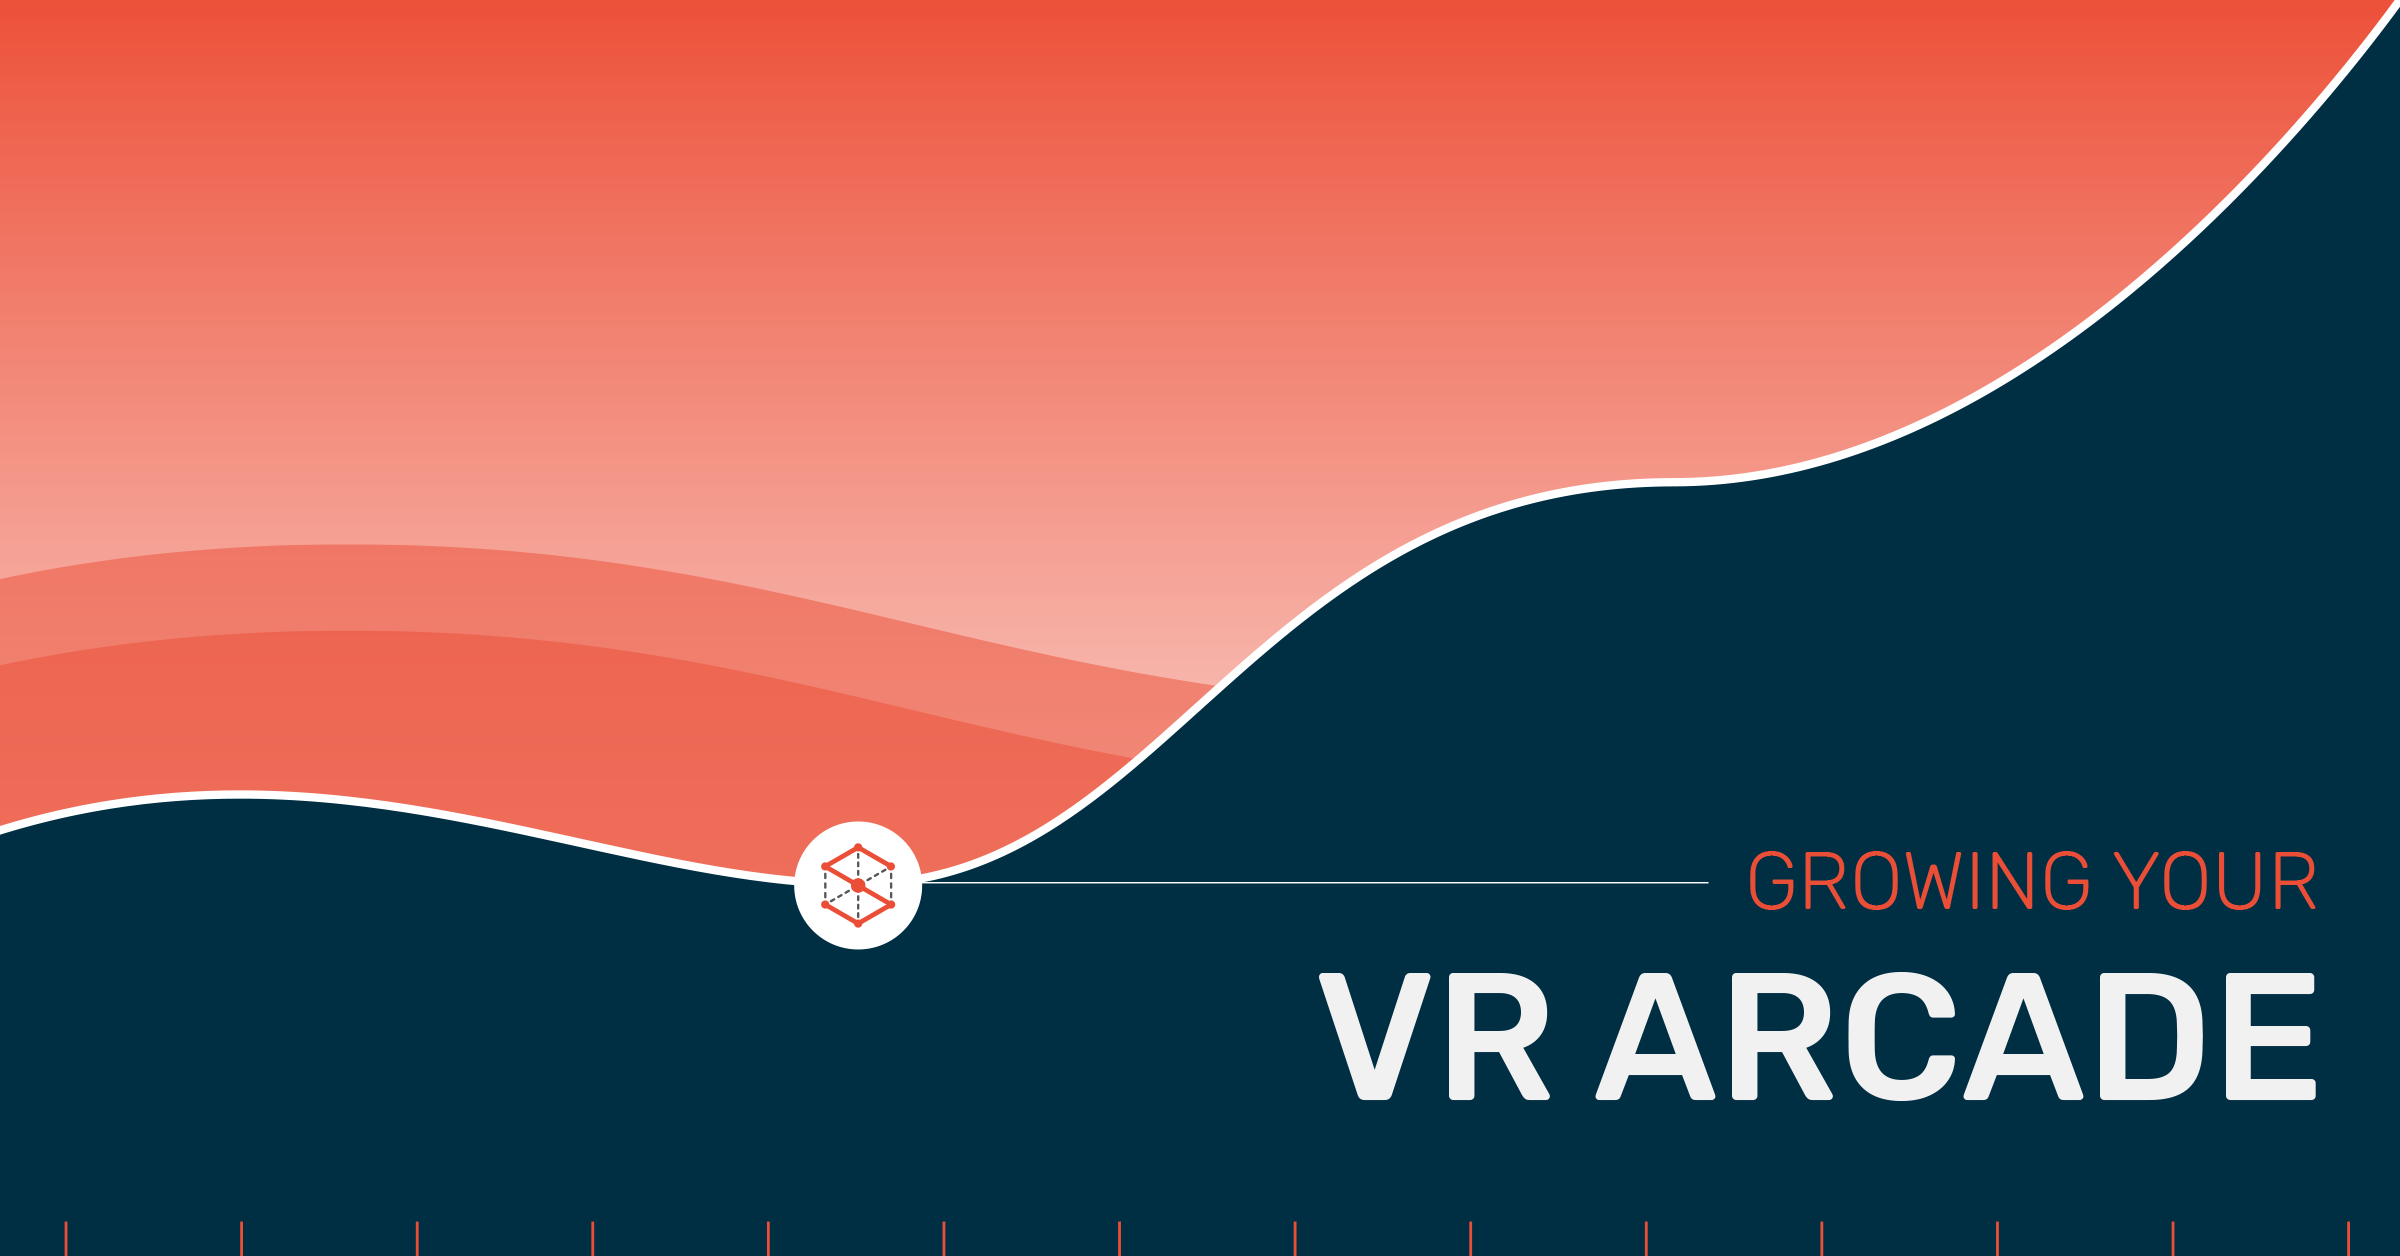 Growing-Your-VR-Arcade.png